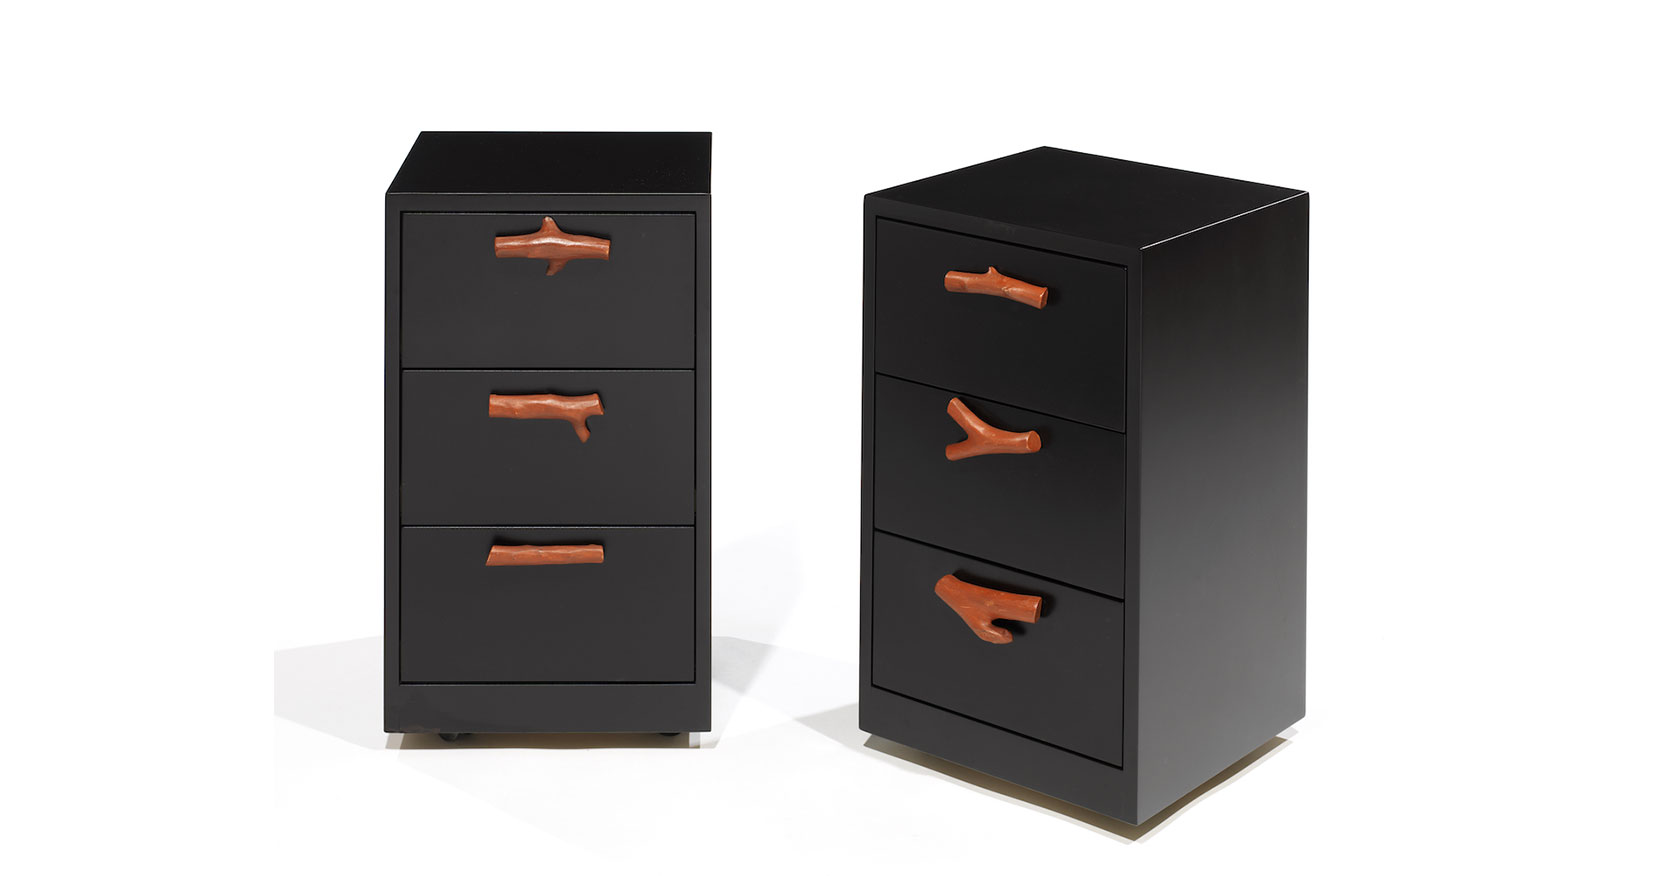 Garouste Bonetti, pair of black cabinets with 3 drawers with orange coral-shaped handles